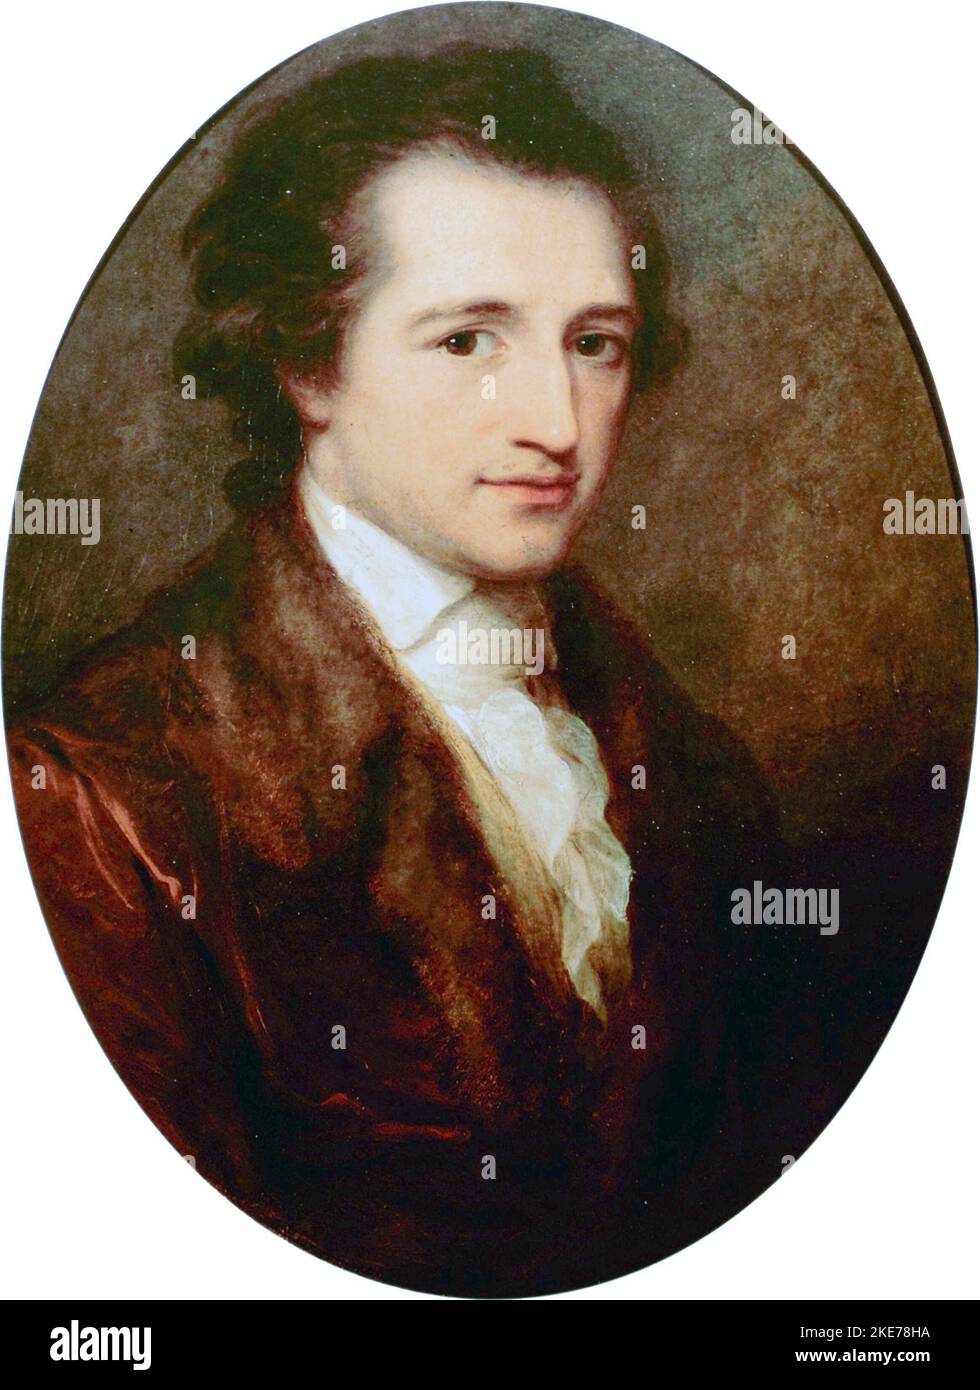 Goethe, age 38, painted by Angelica Kauffman 1787 Johann Wolfgang von Goethe (1749 – 1832) German poet, playwright and novelist Stock Photo